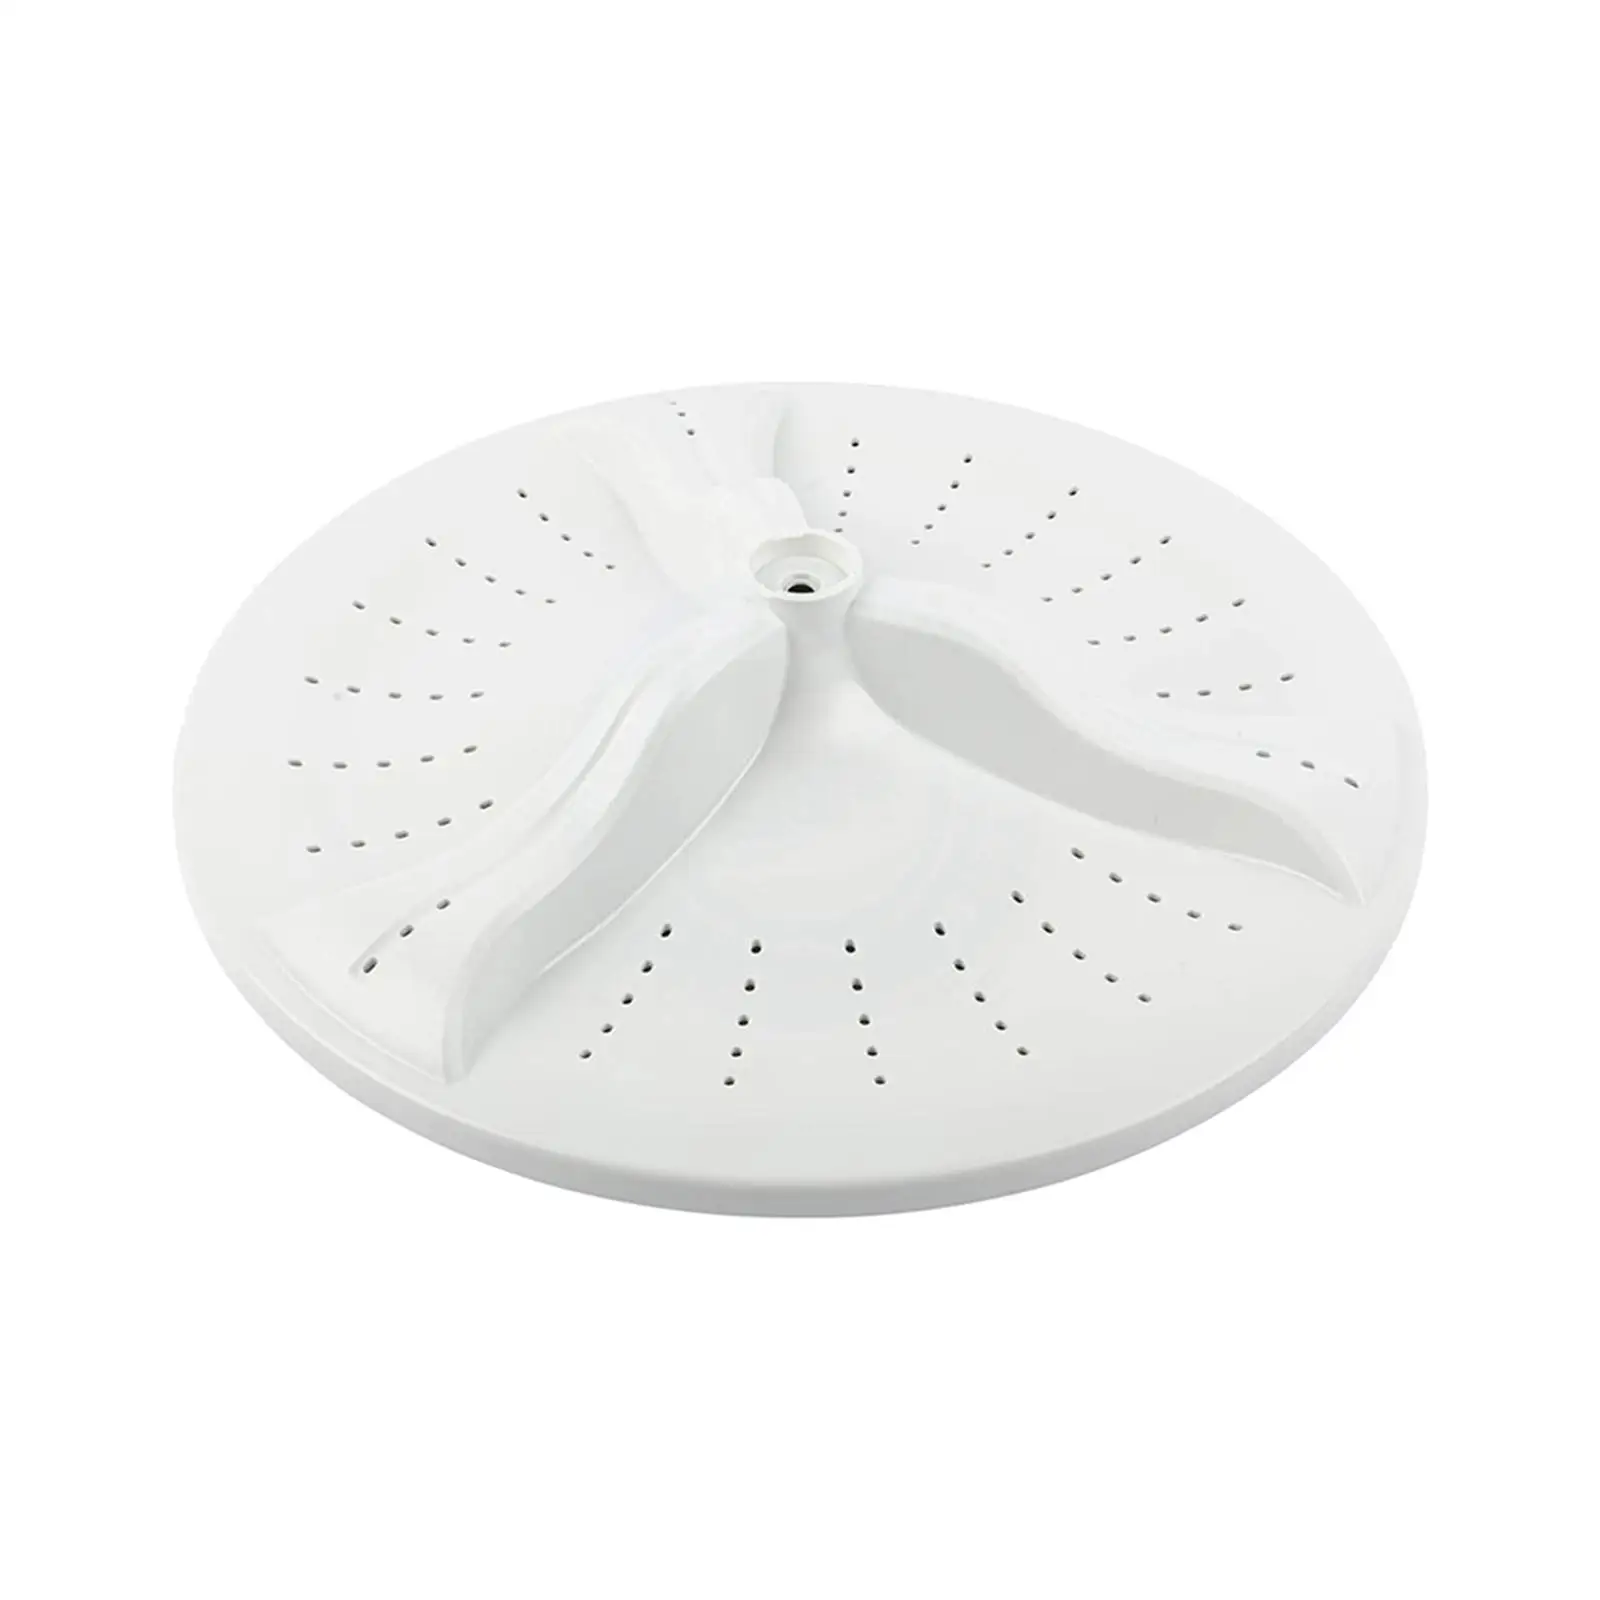 Automatic Washer Wash plate White Direct Replace 41cm Round Portable Eas... - $63.76